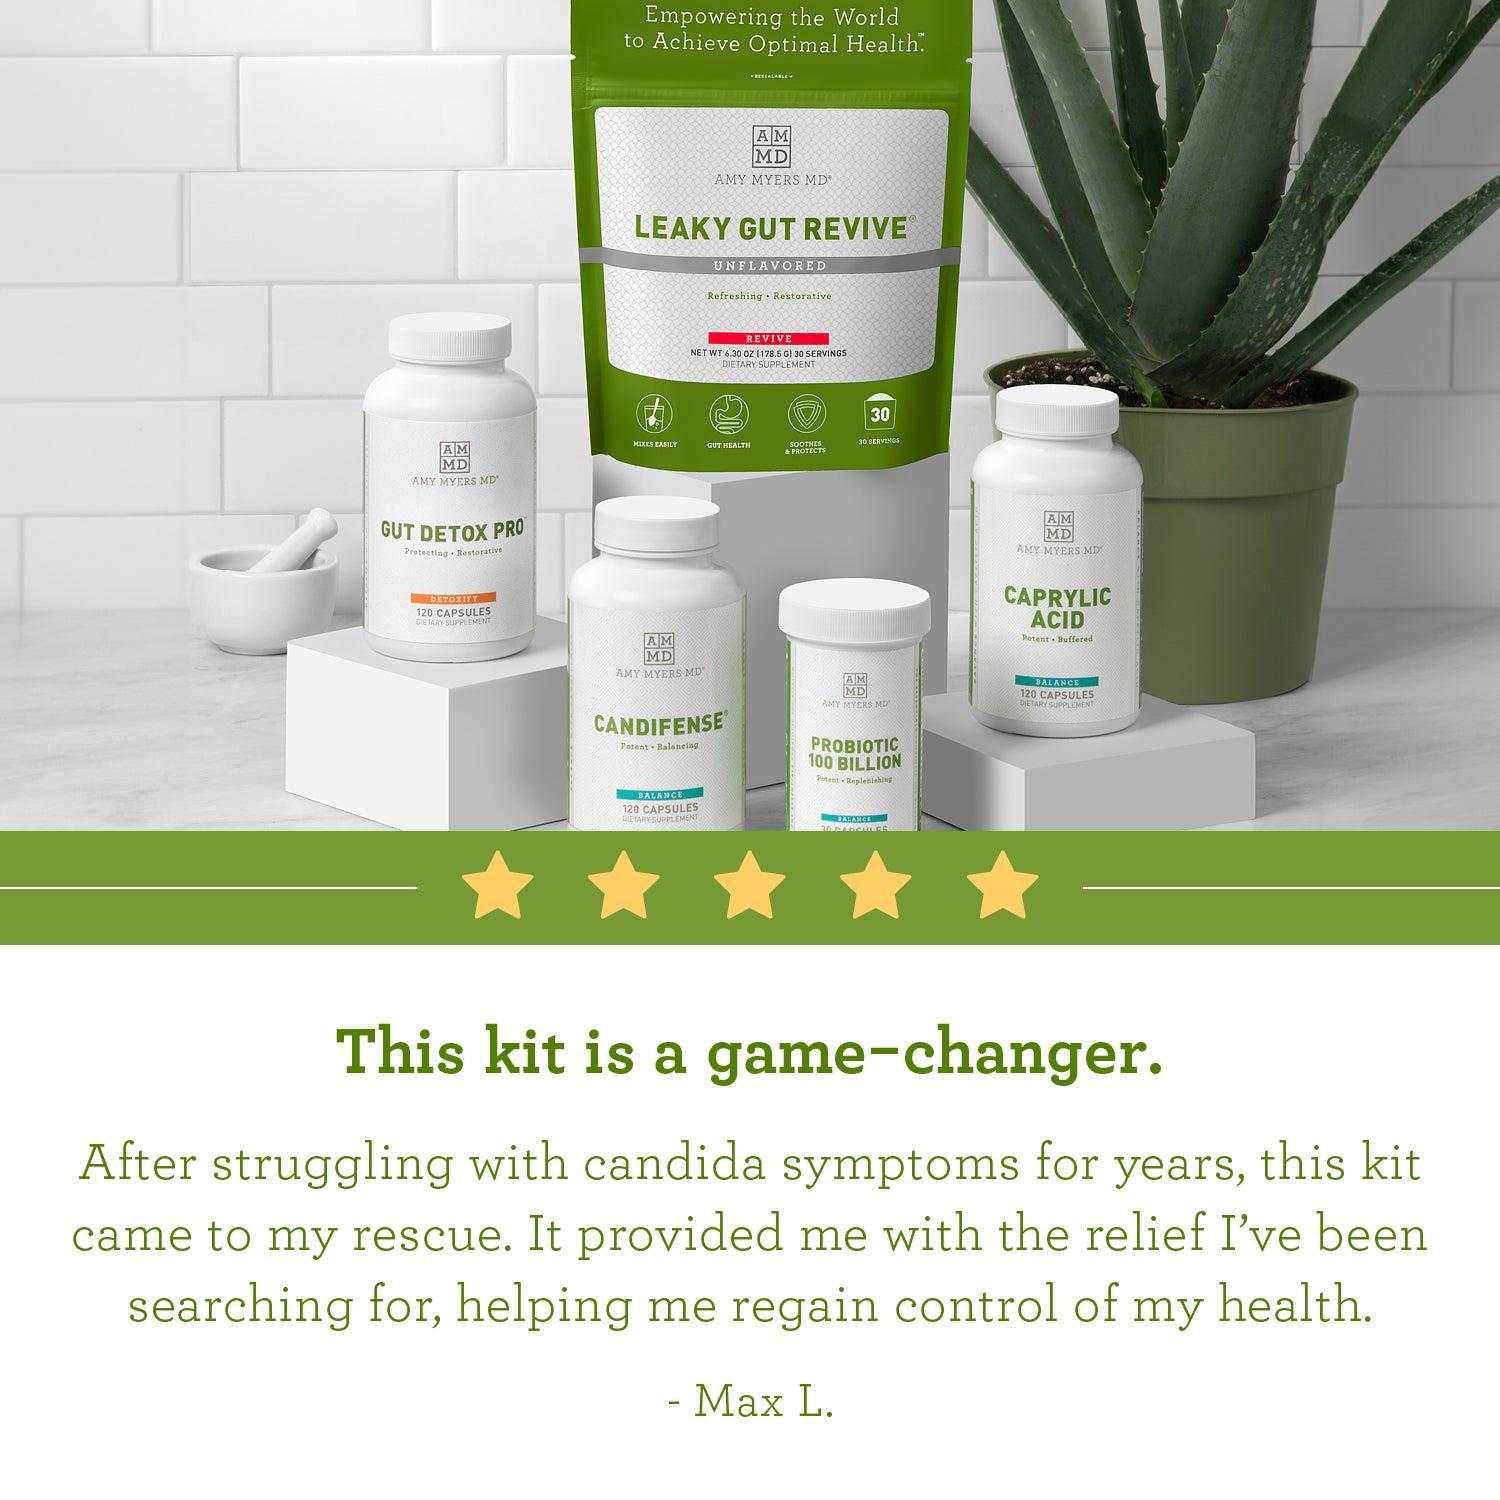 Customer review: "This kit is a game-changer. After struggling with candida symptoms for years, this kit came to my rescue. It provided me with the relief I've been searching for, helping me regain control of my health." -Max L.